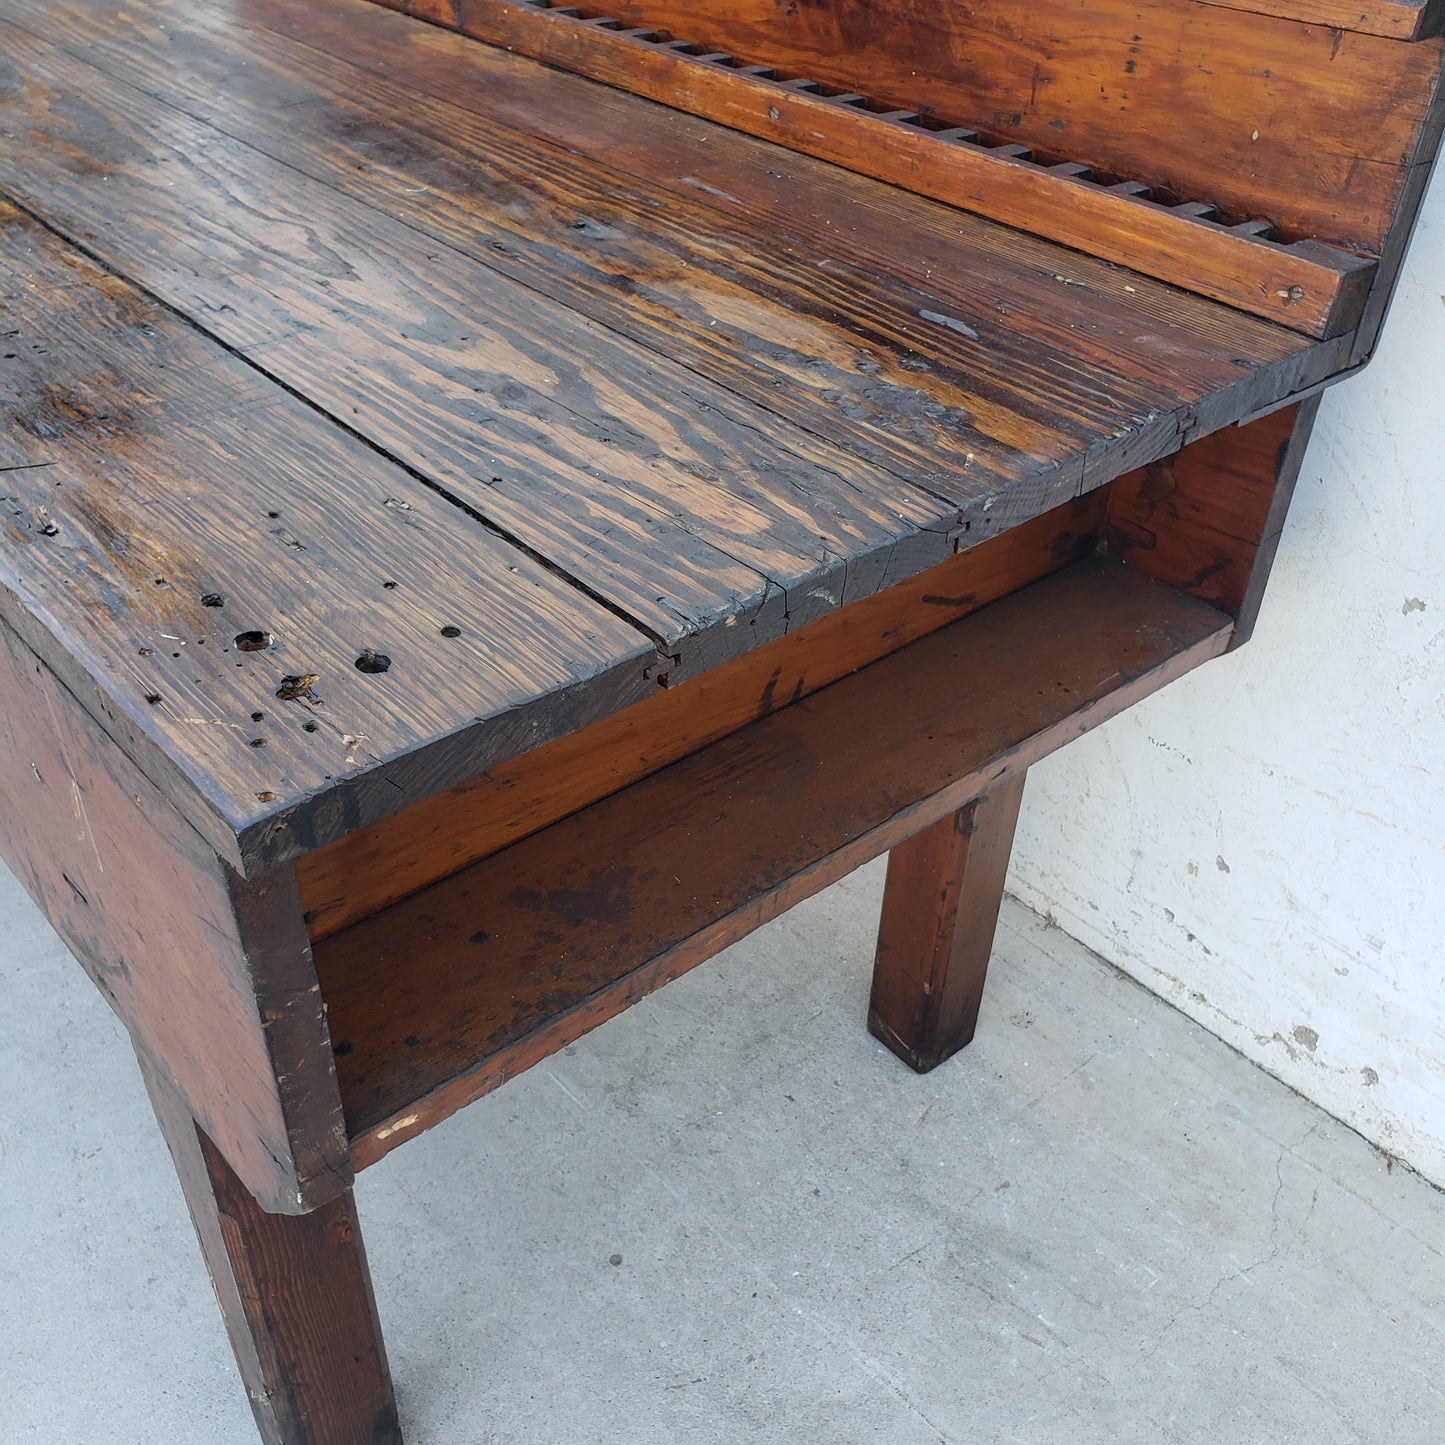 Antique Wooden Work Table